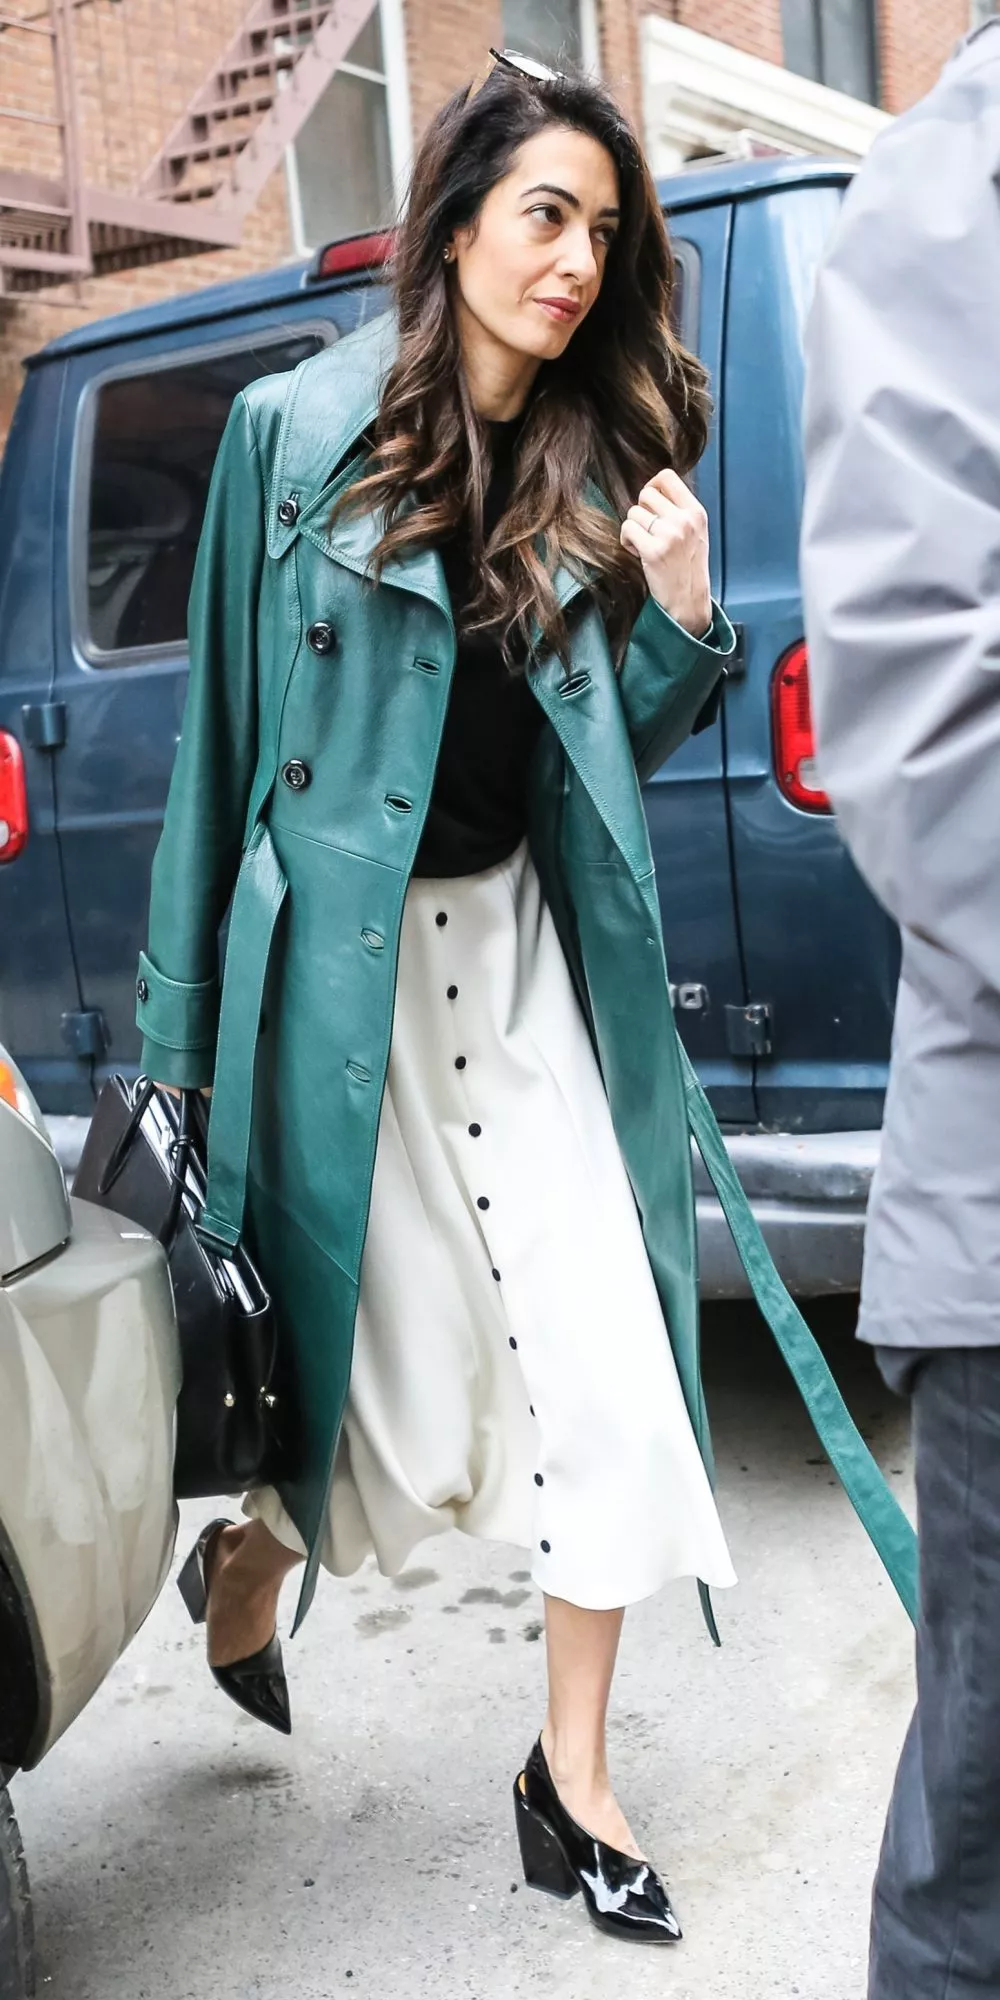 Amal Clooney’s Spring Wardrobe Features the Chicest Raincoat We’ve Ever Seen